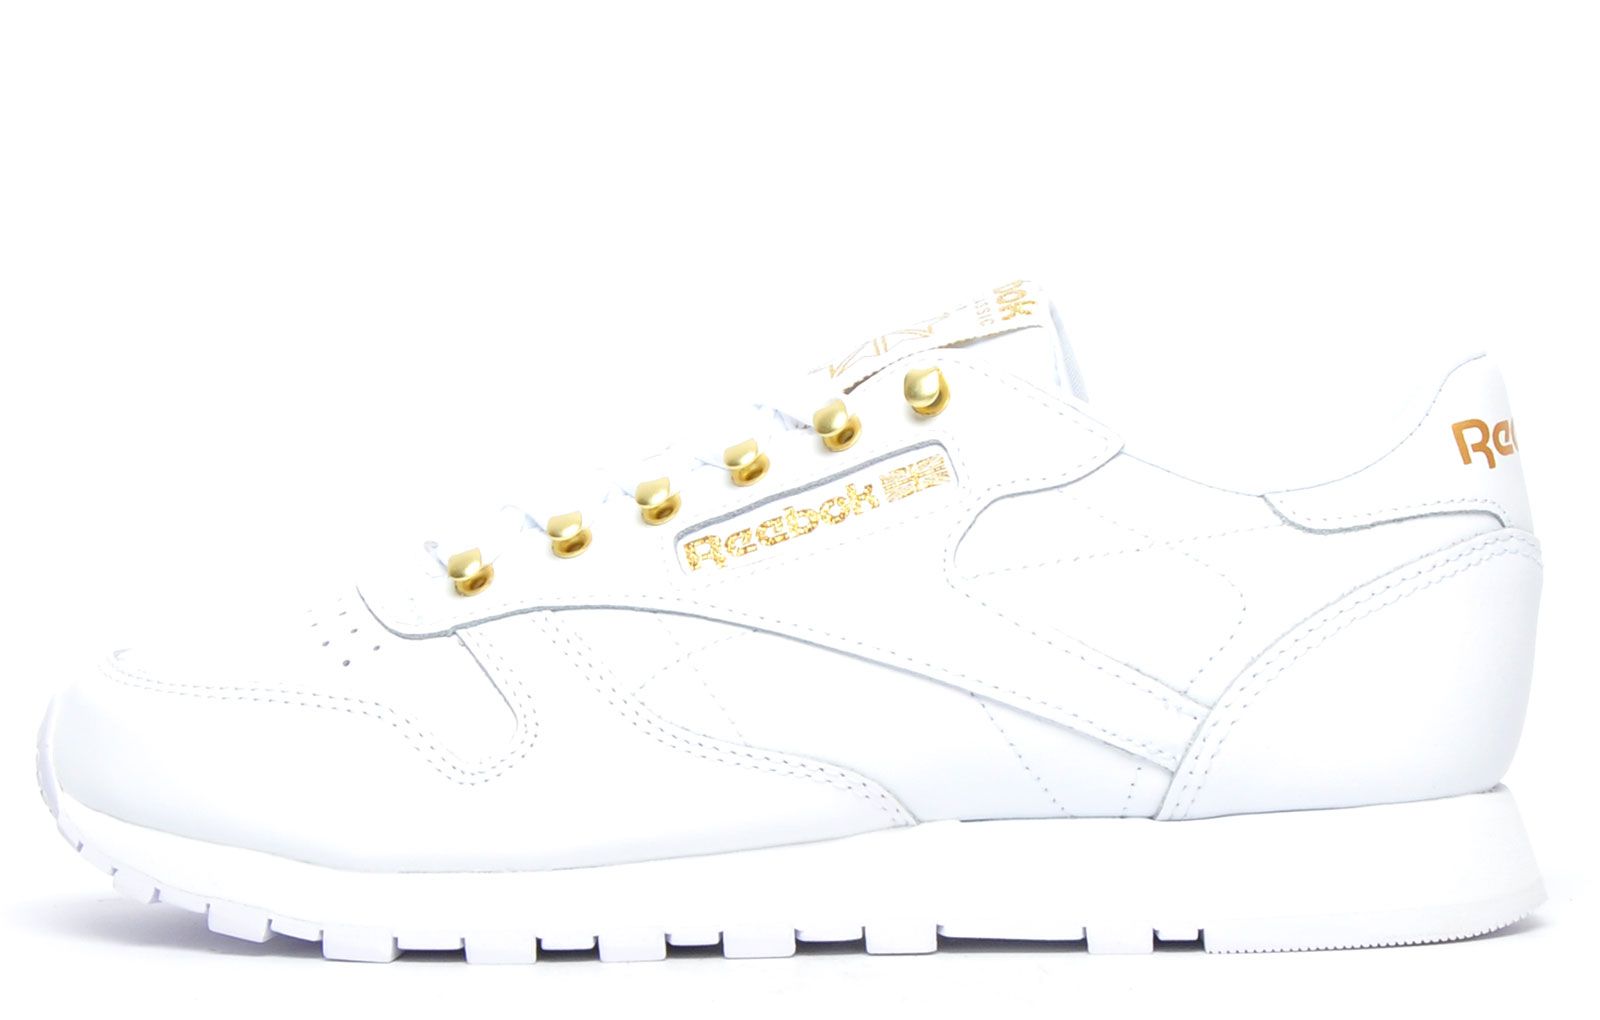 Born from a classic Reebok 80s inspired running shoe, these Reebok Classic Leather trainers offer a premium leather upper fused with a soft padded collar and tongue allowing you to be chic and stylish with this iconic silhouette. Completed with an EVA shock absorbing midsole and high abrasion rubber outsole, delivering supreme security and comfort for your feet all day long.
 - Premium leather upper
 - Unique loop lacing system
 - Soft padded insole
 - EVA shock absorbing midsole
 - Padded tongue and ankle collar
 - Durable grippy outsole
 - Reebok Classic branding throughout